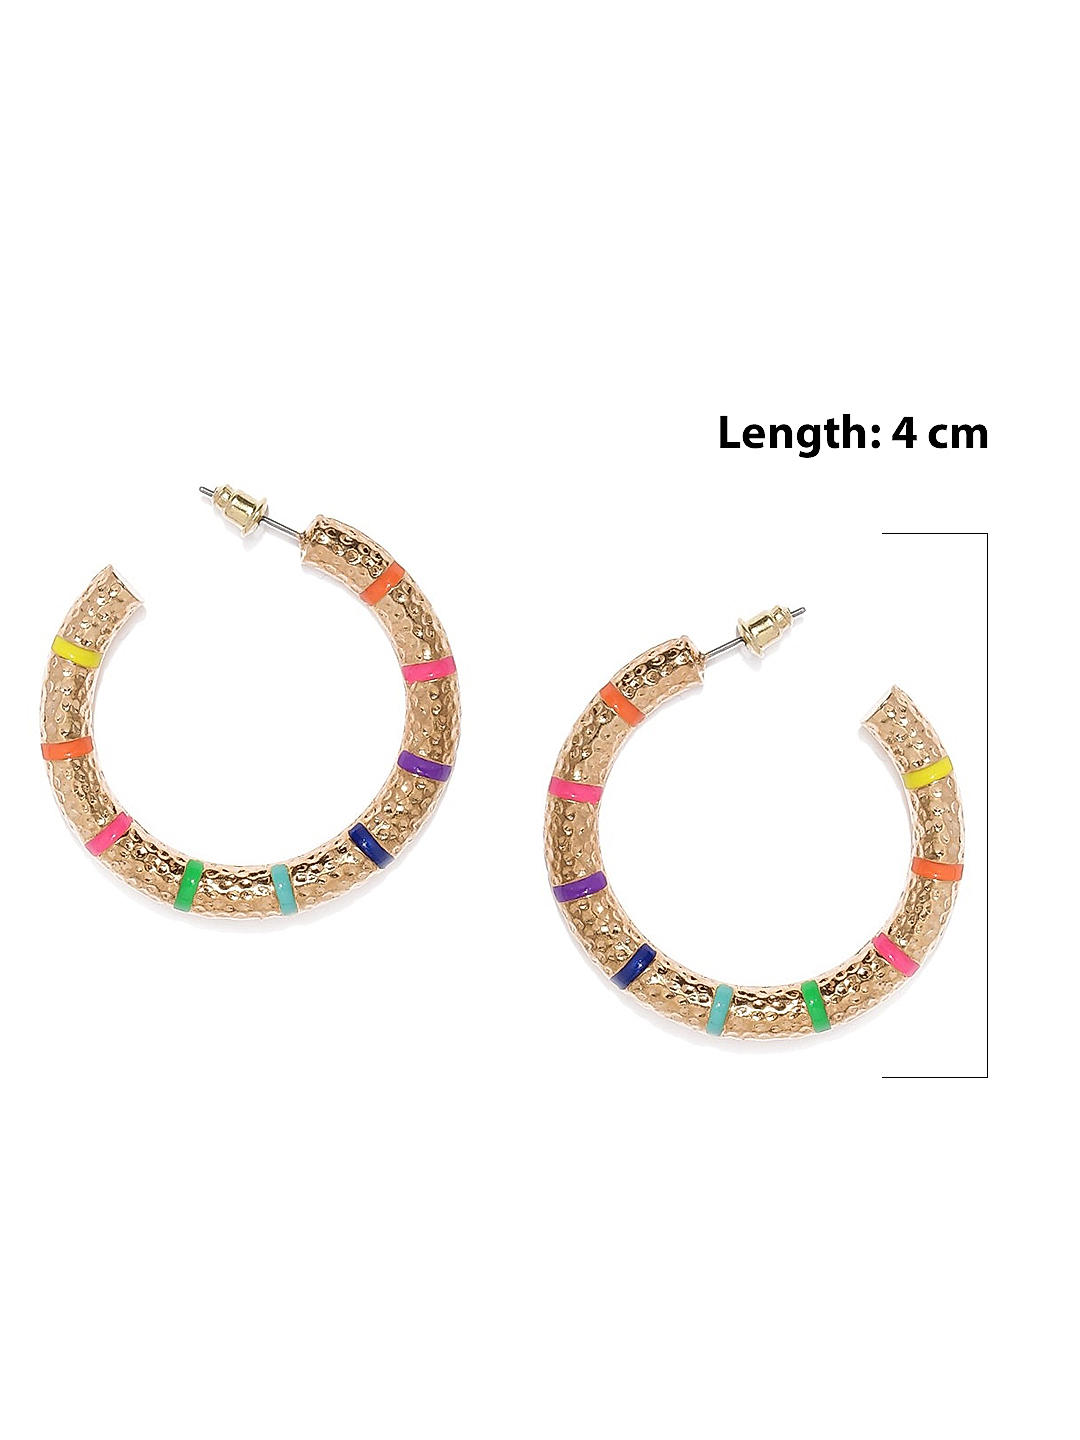 18k White & Rose Gold Diamond Hoop Earrings. 1.45ctw White Pave Diamonds.  Made in Italy by LuxGioielli